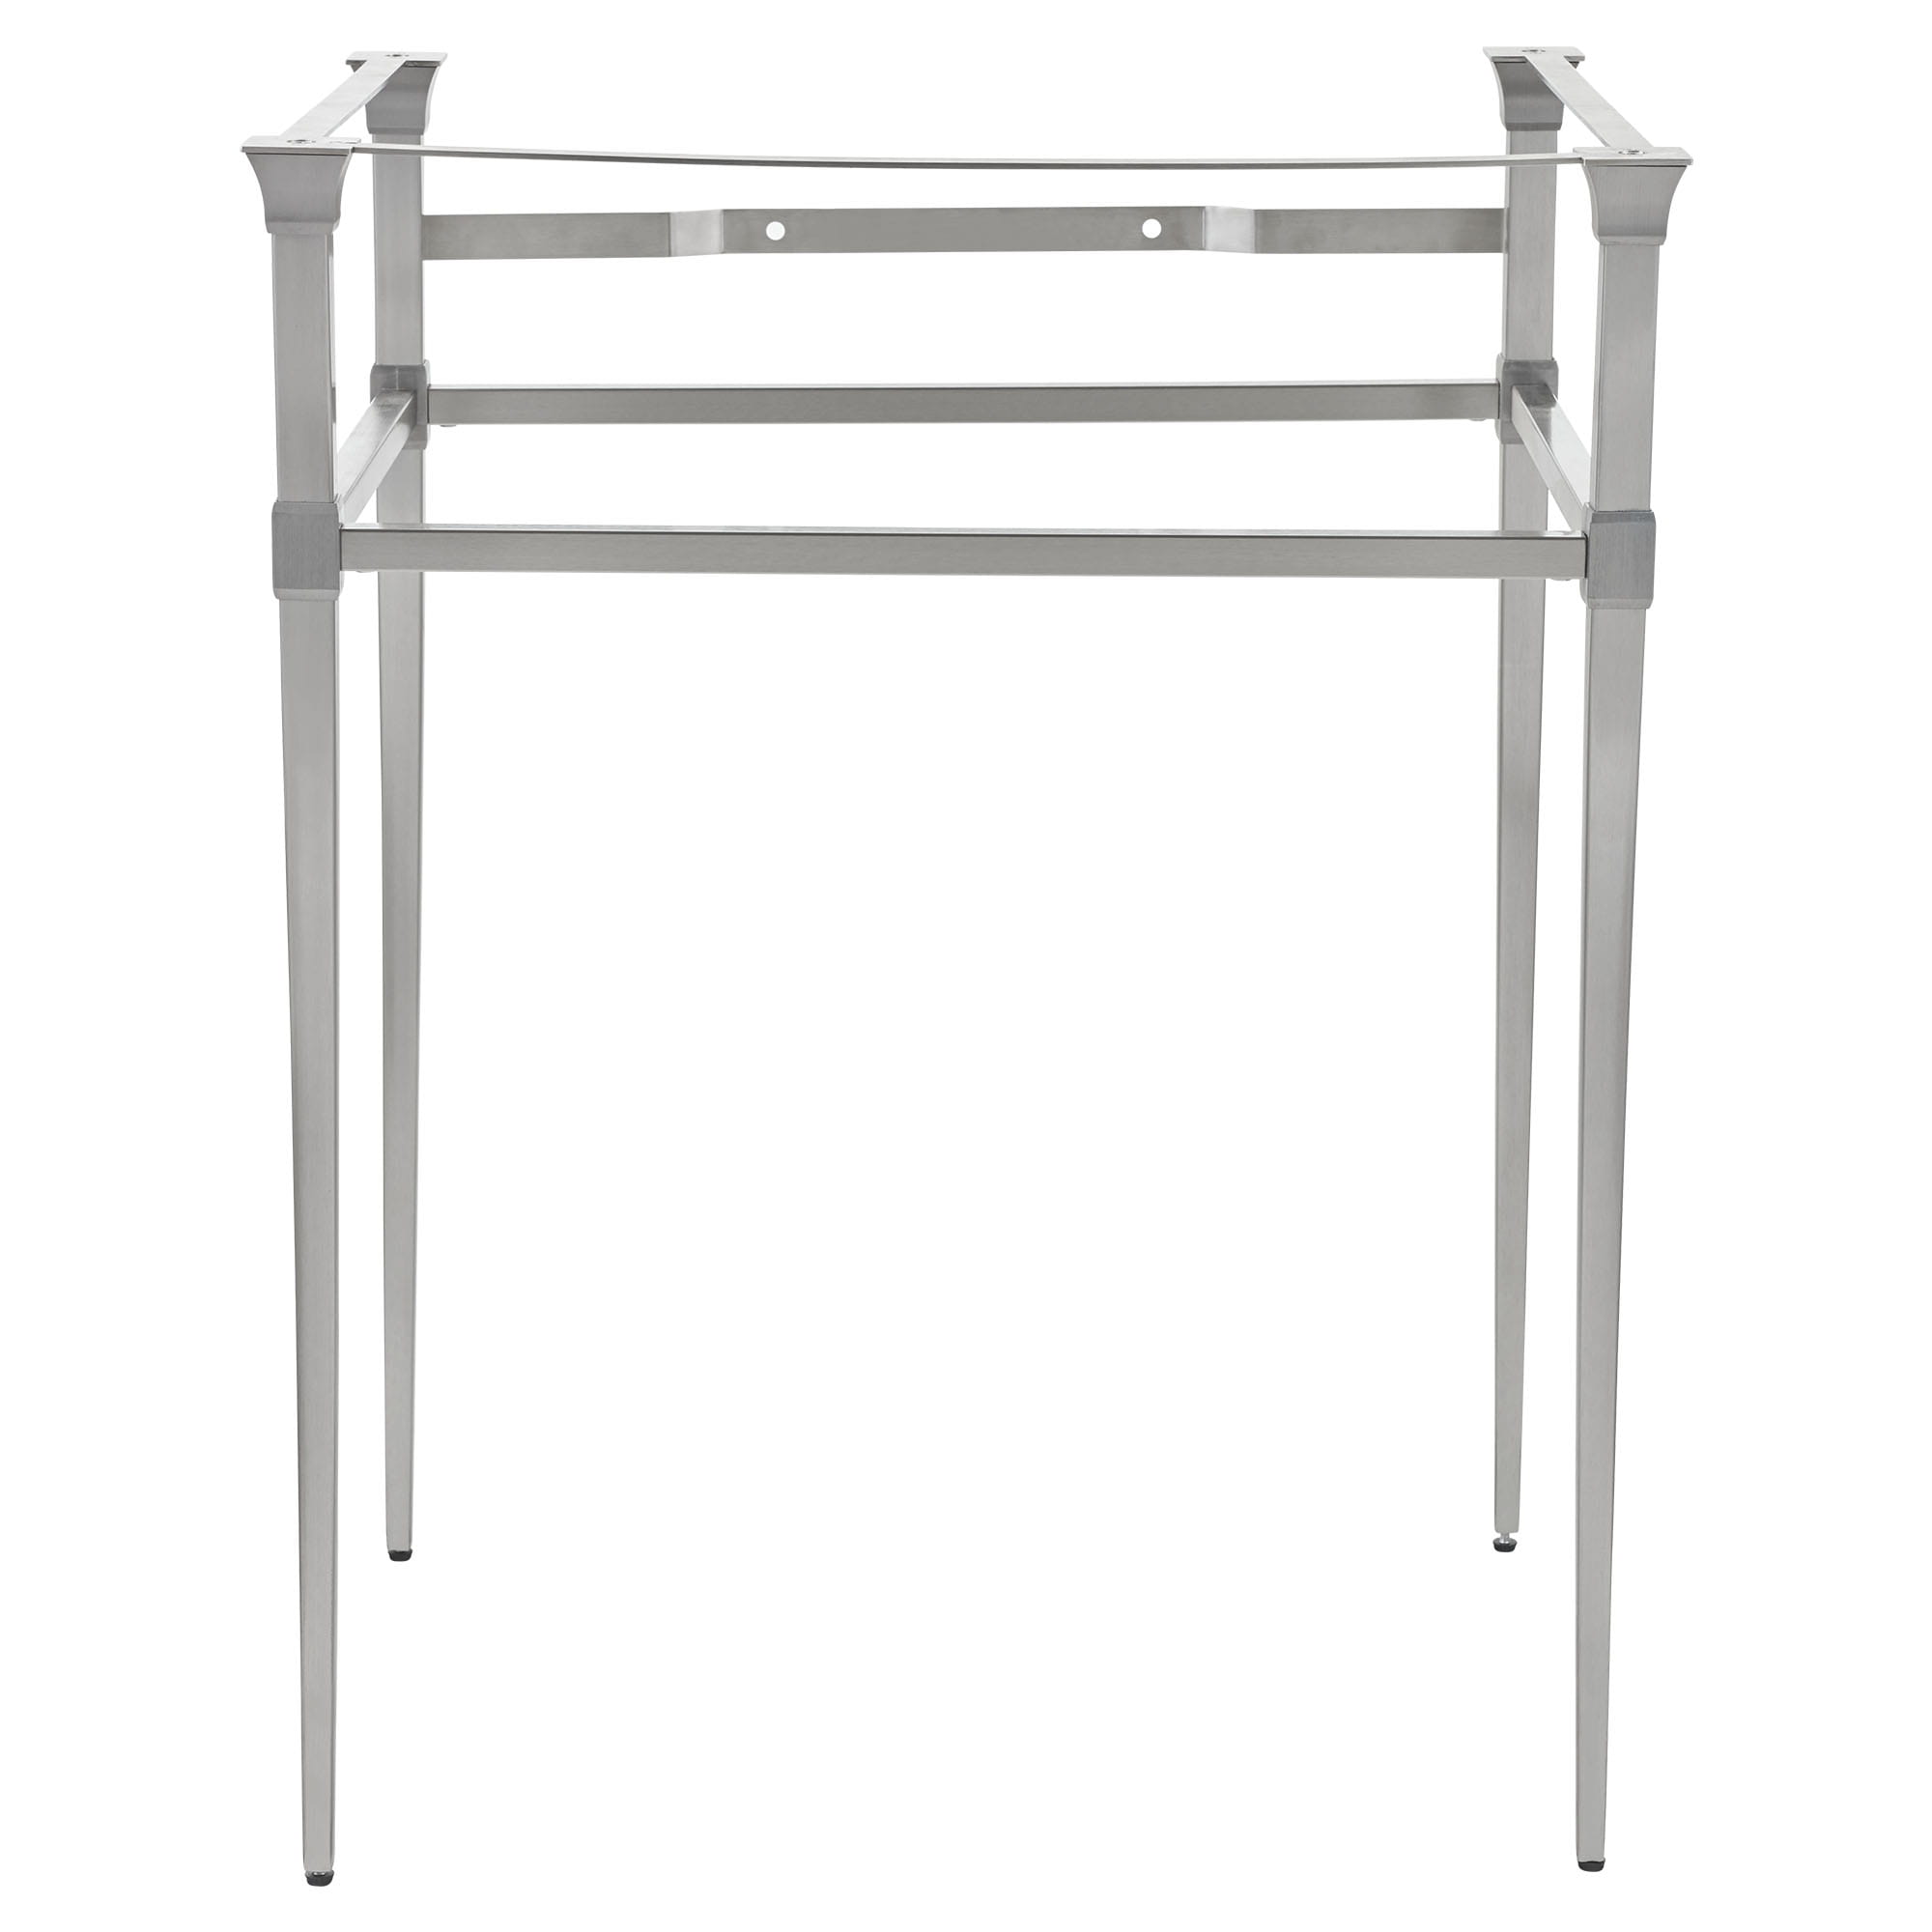 Town Square S Console Table   BRUSHED NICKEL